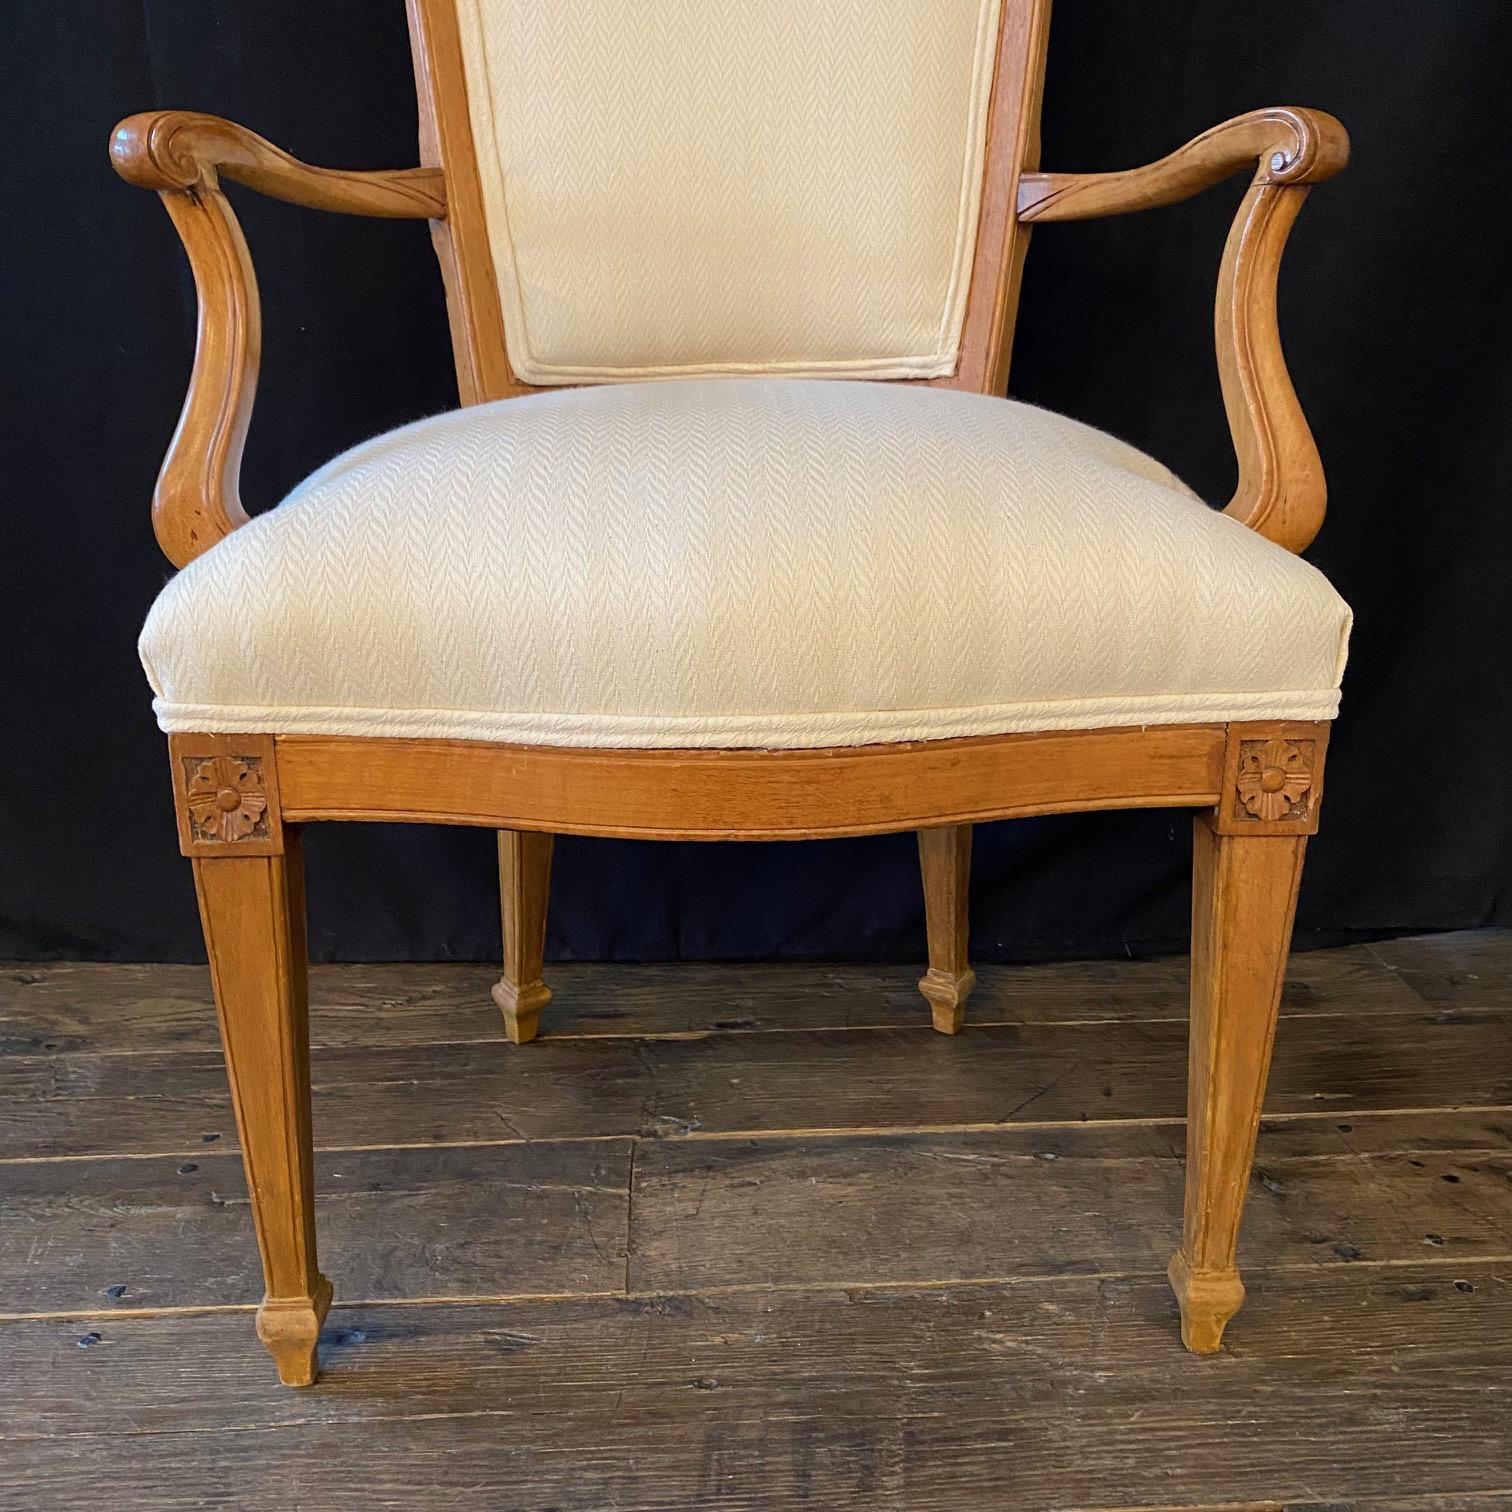 Superb pair of antique Louis XVI style dining armchairs. These lovely carved walnut chairs are in remarkably good solid condition while retaining their original wood surface. The chairs have been reupholstered in a neutral high end linen cotton